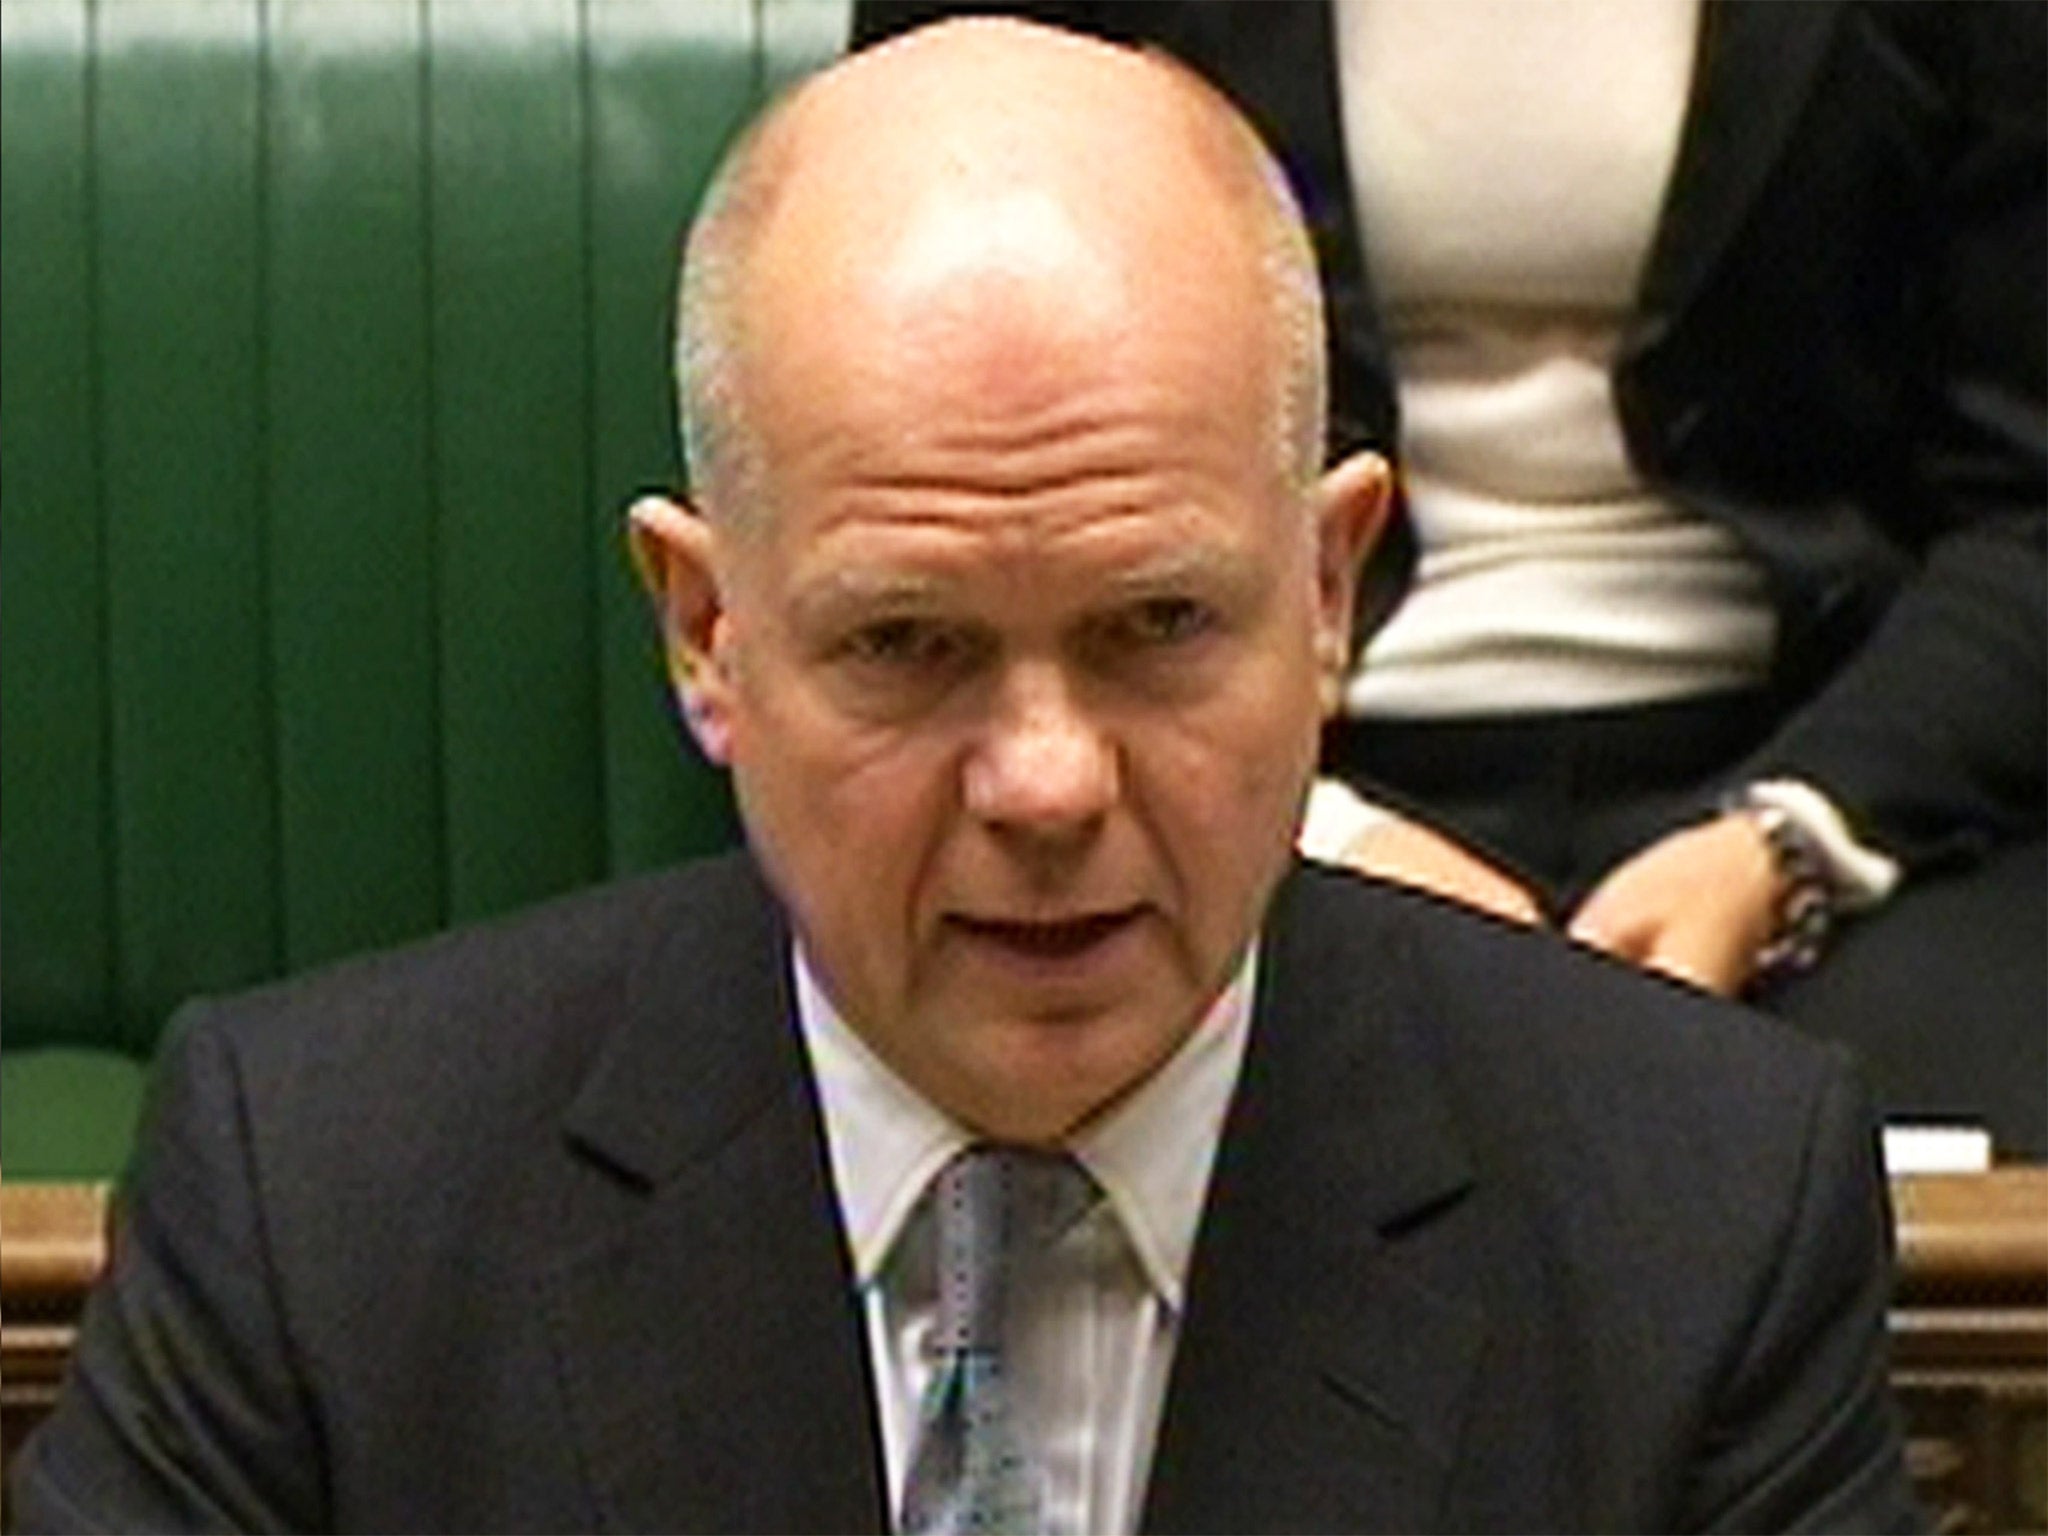 Commons leader William Hague, speaking in the House of Commons on Tuesday